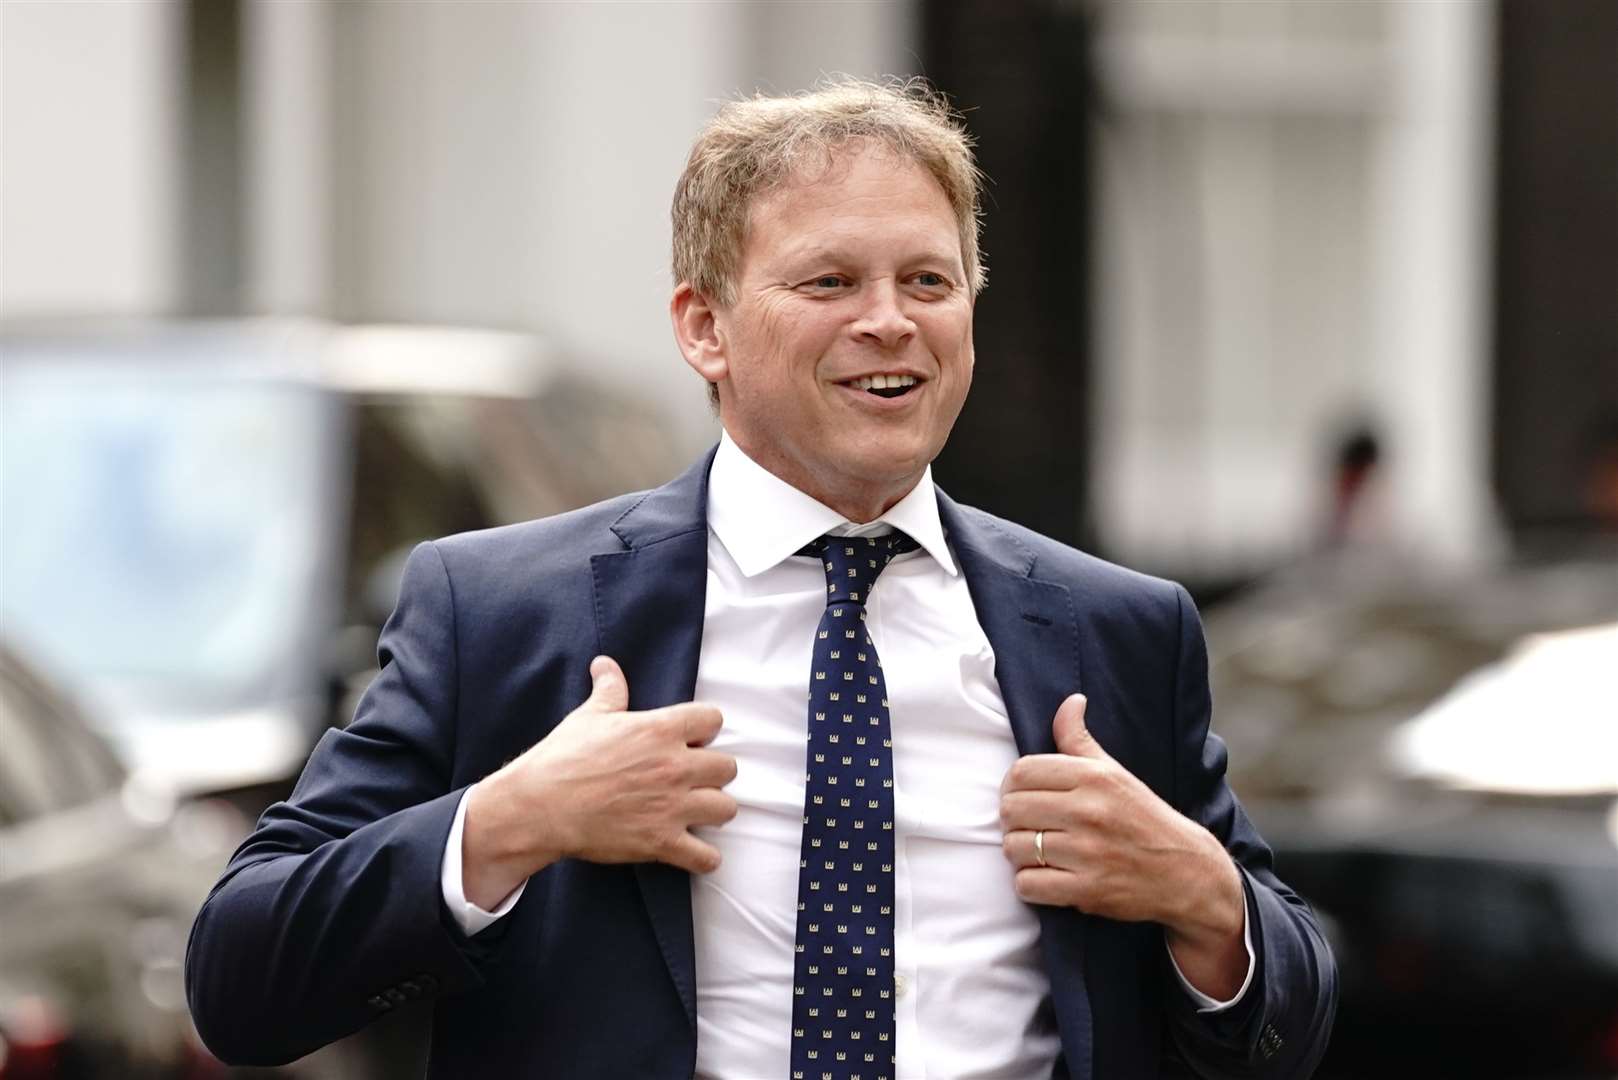 Energy Security Secretary Grant Shapps said householders will not have to pay more on their energy bills to fund hydrogen production (Victoria Jones/PA)